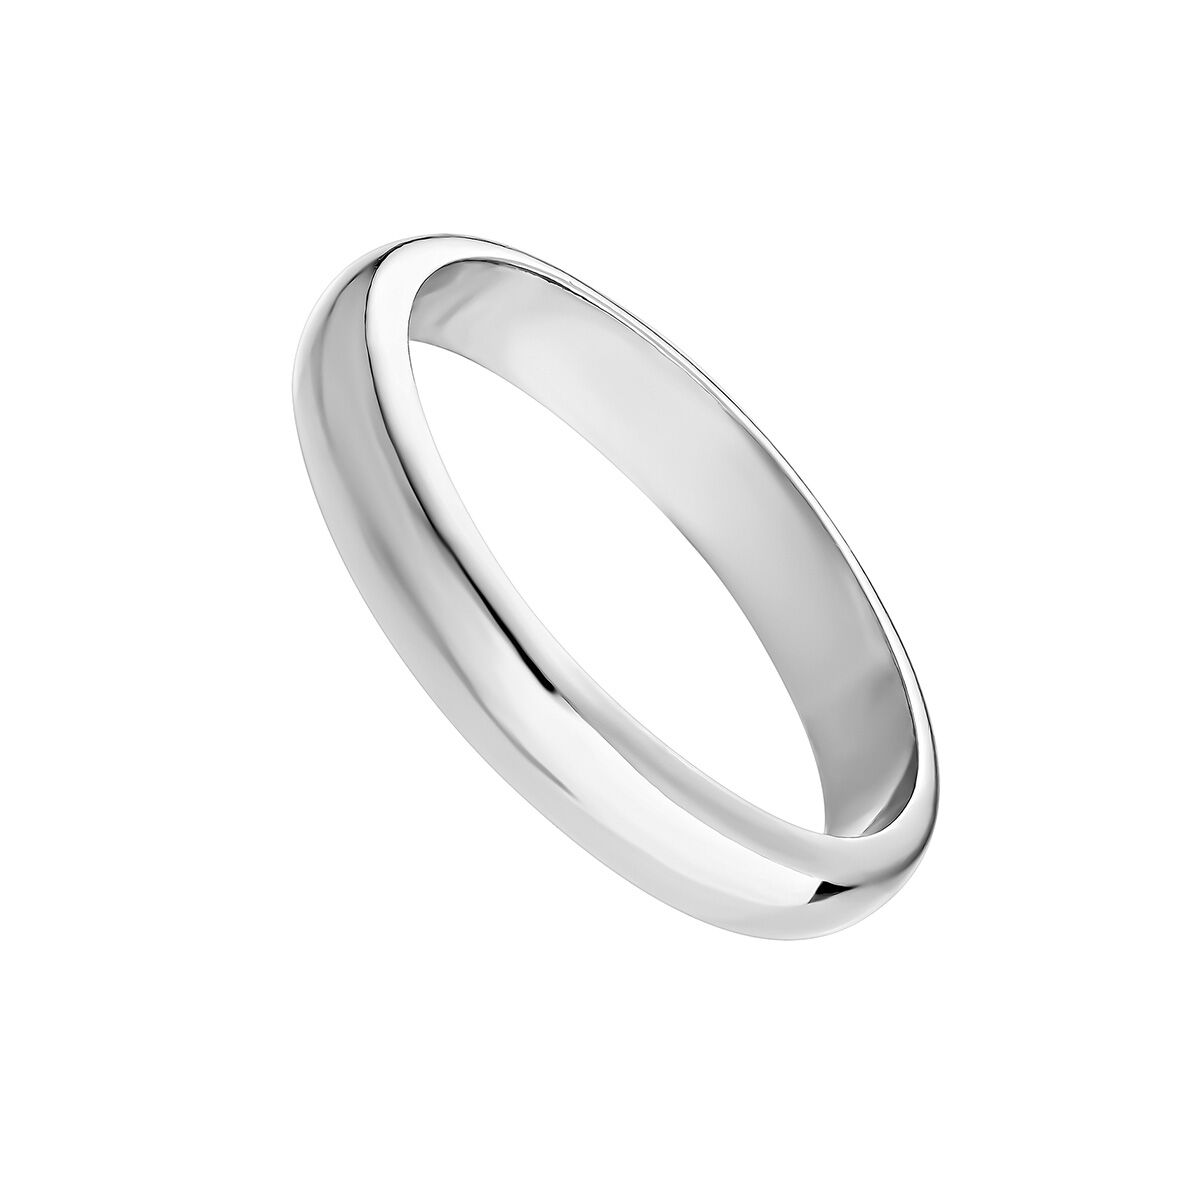 Silver wedding ring with heart on the inside, J05156-01, hi-res